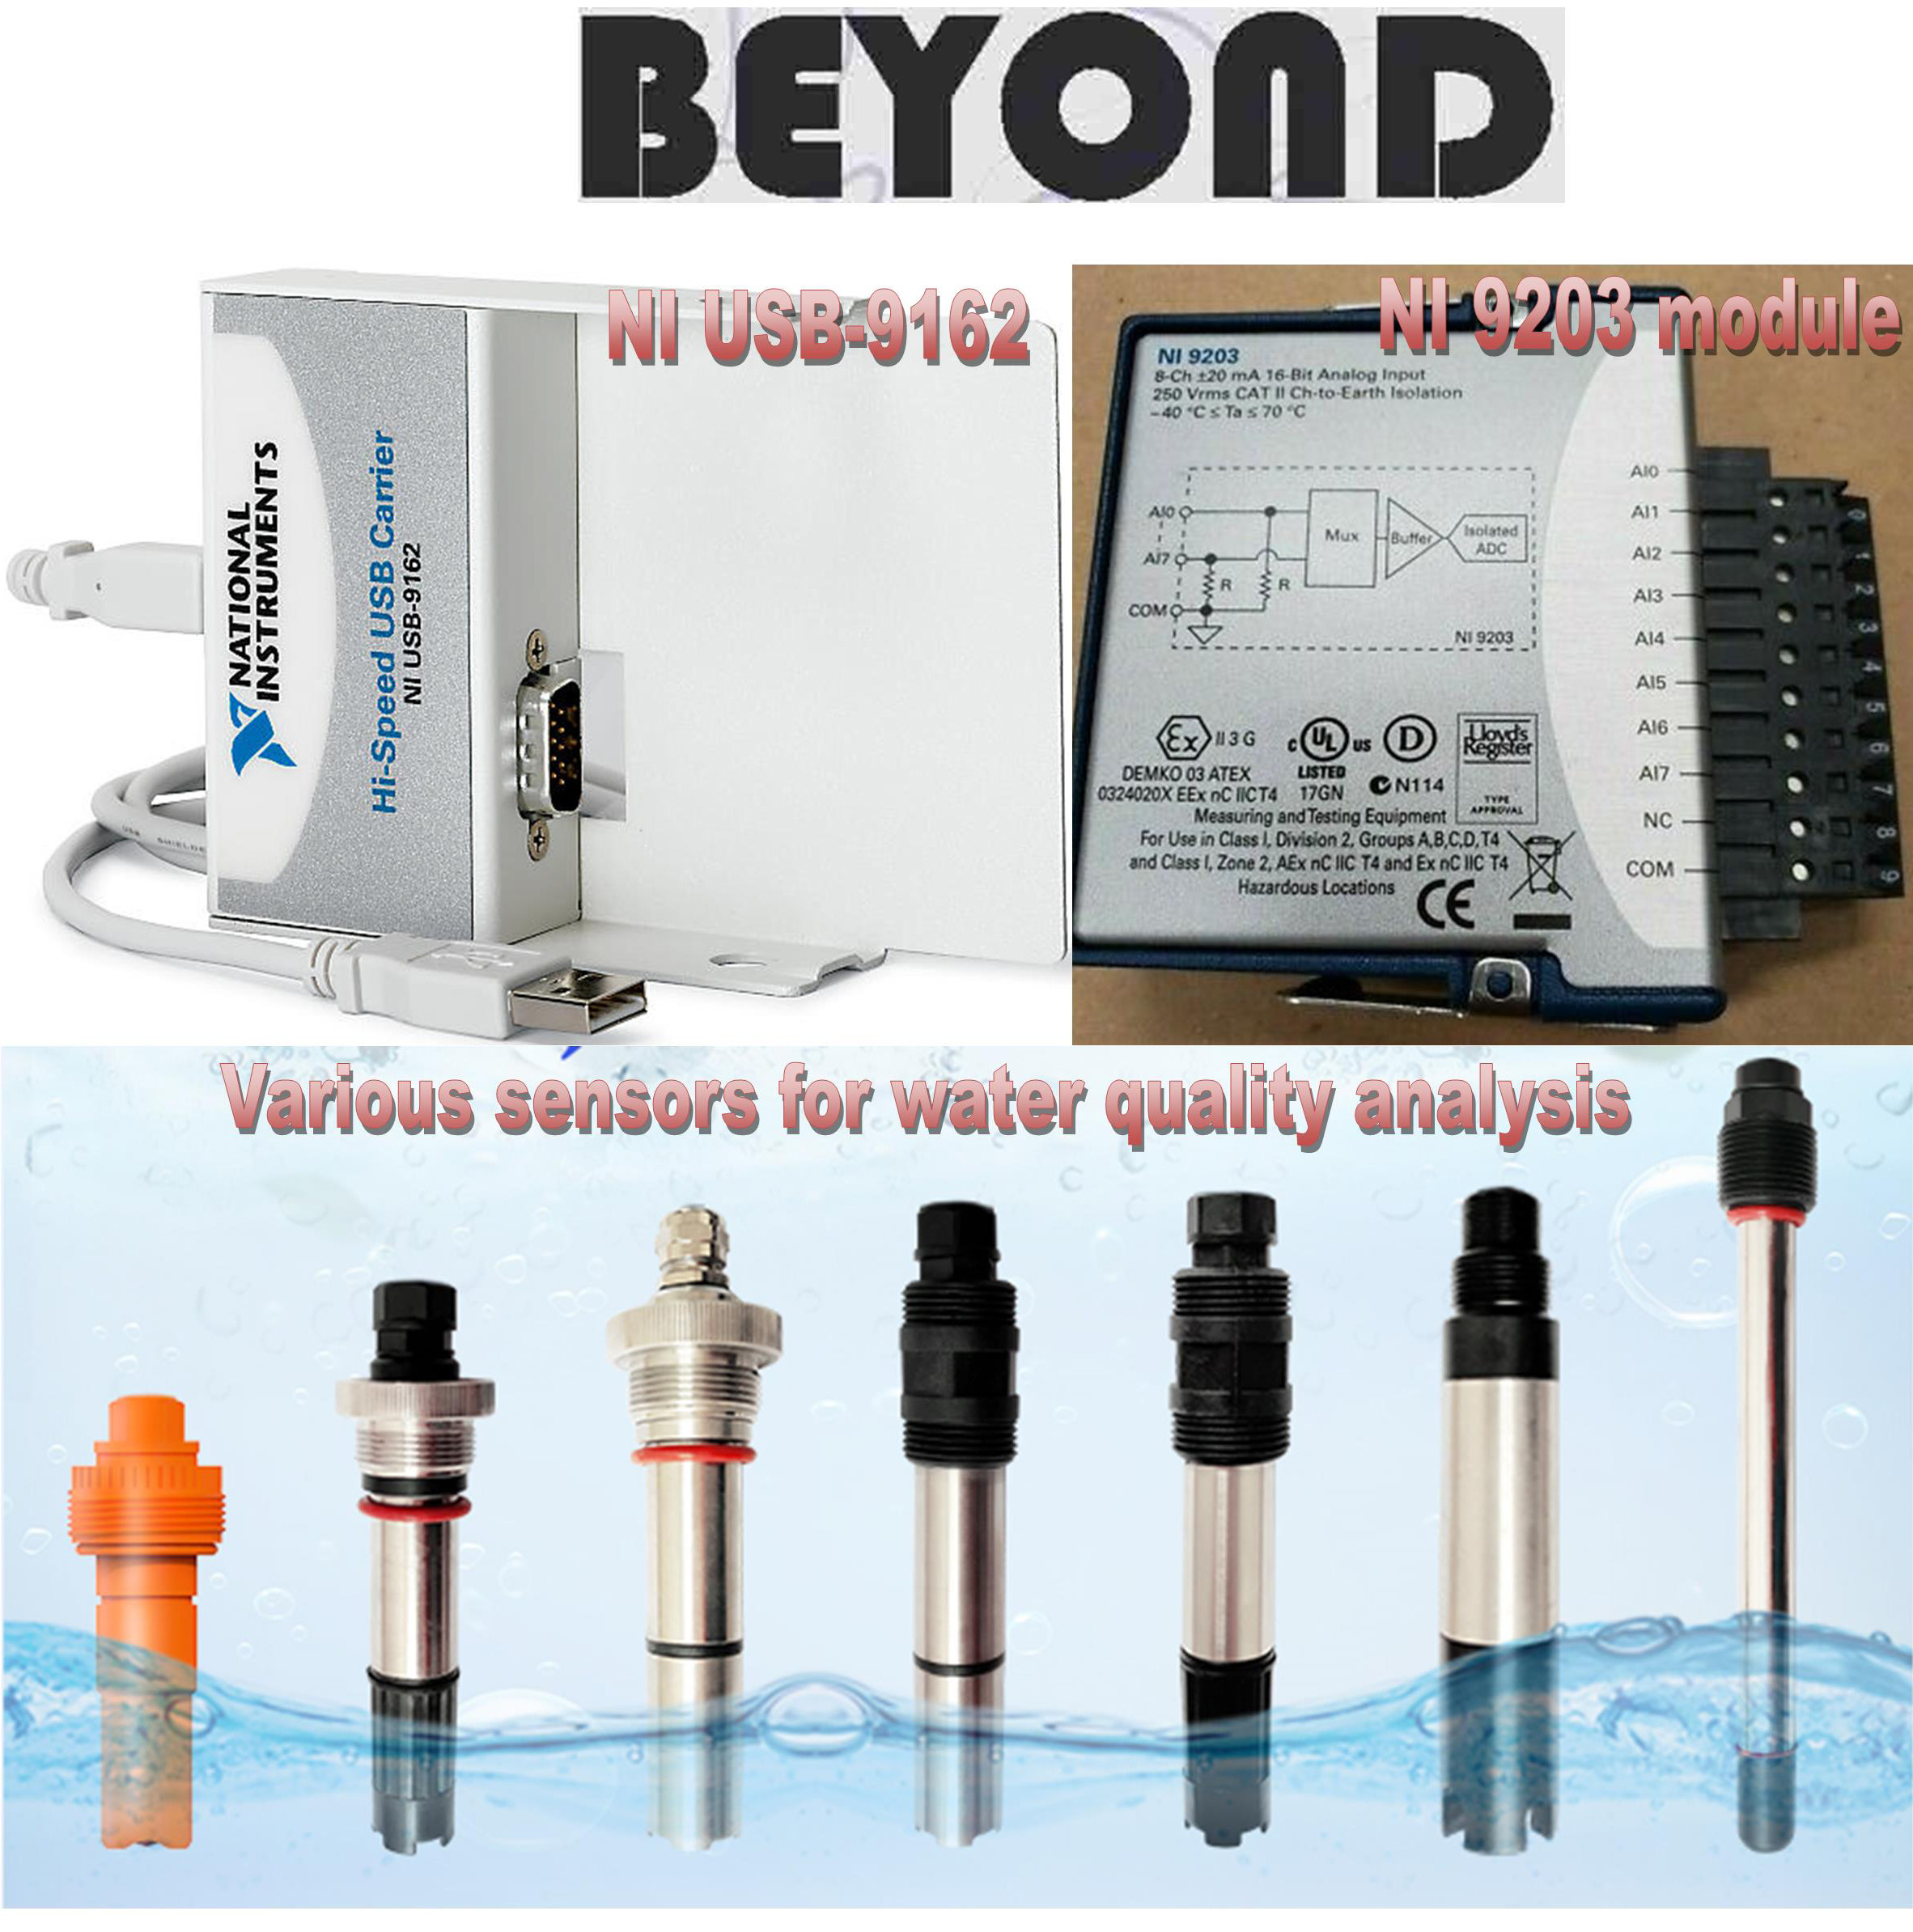 Intelligent Water Sensors for Water Quality Monitoring and Analysis